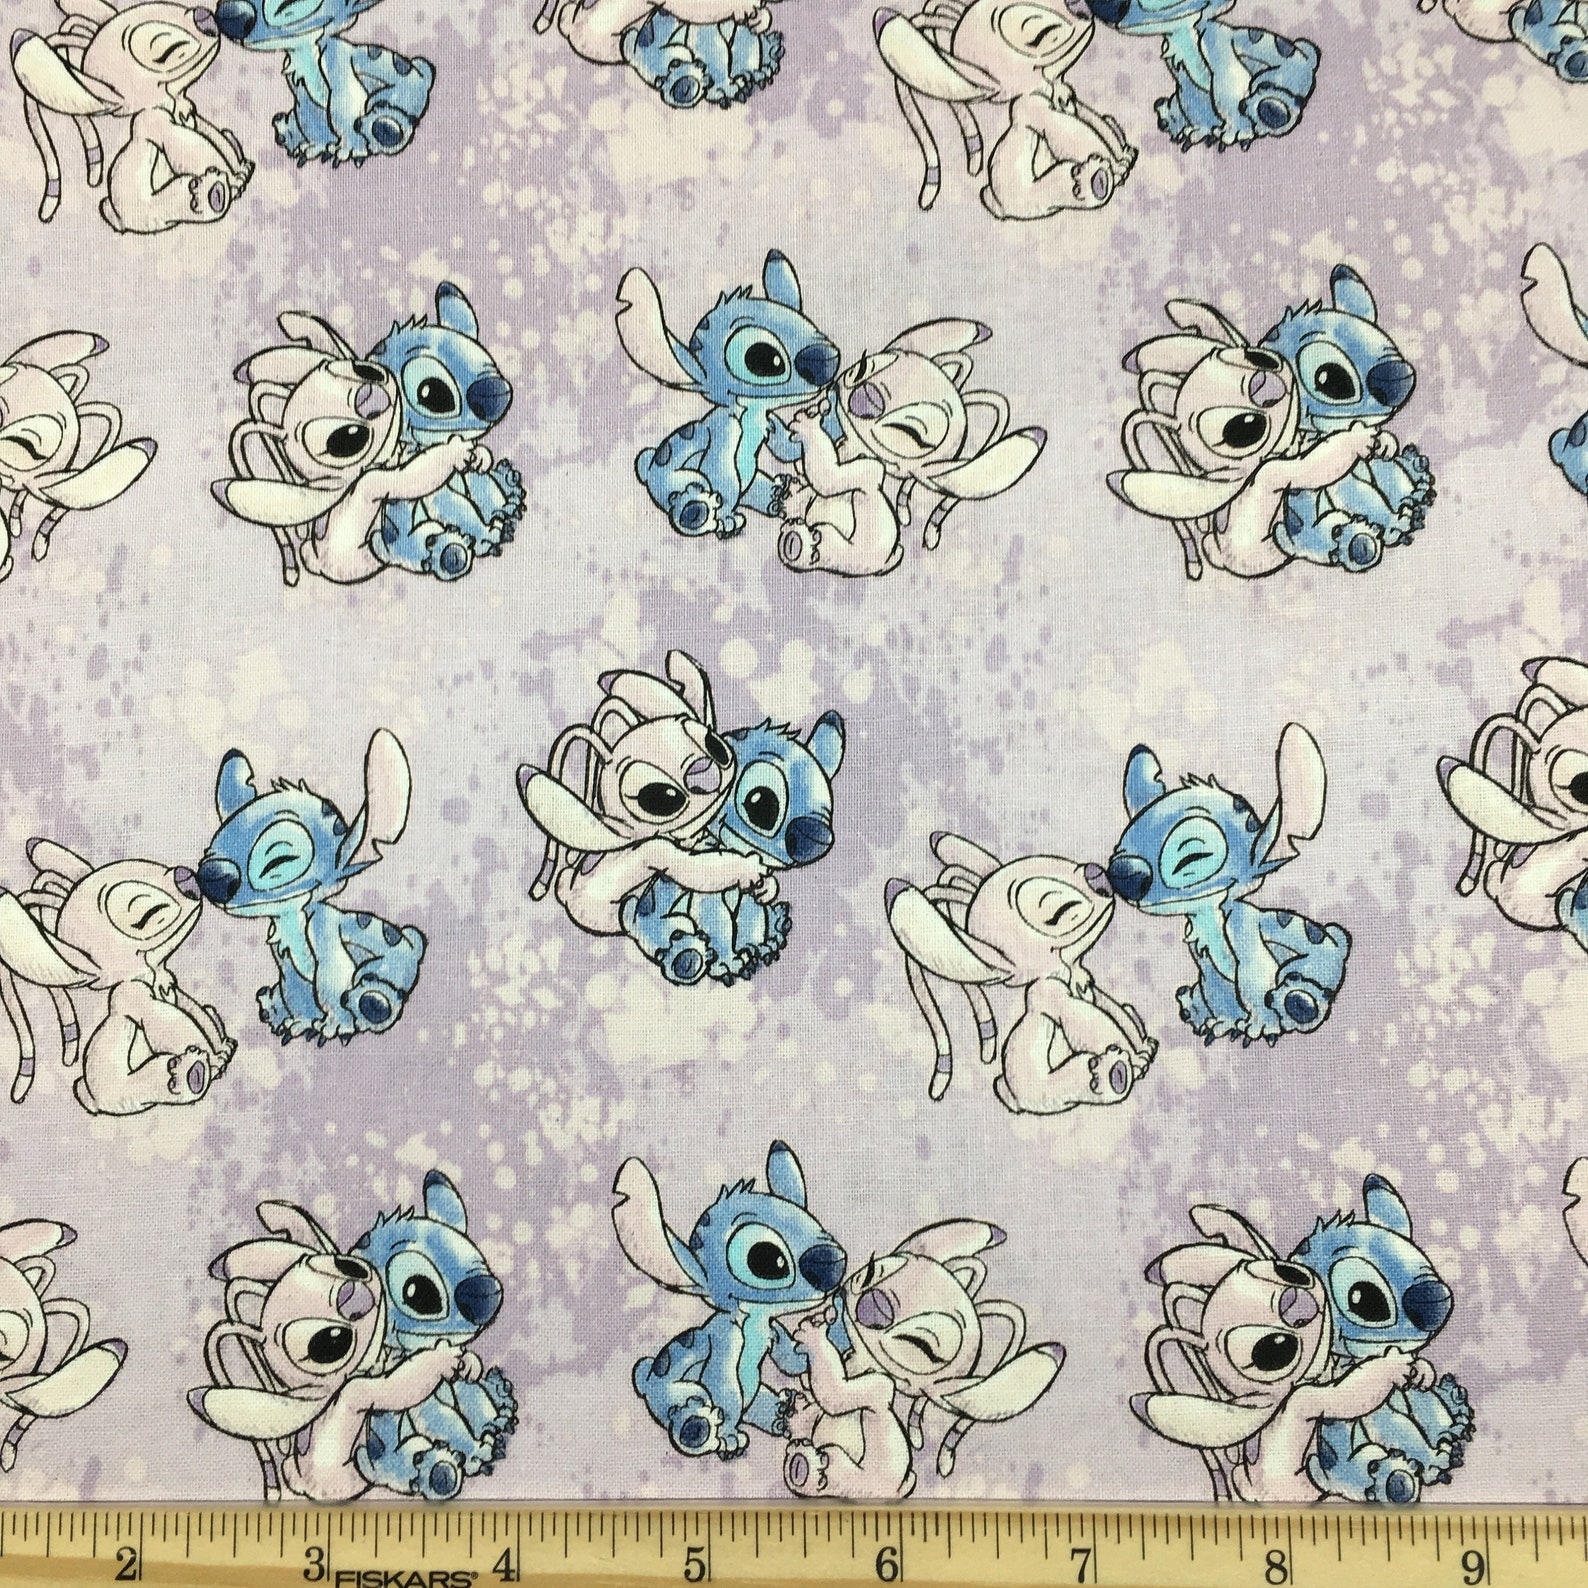 Lilo and Stitch with Angel fabric by the yard 44 W | Etsy